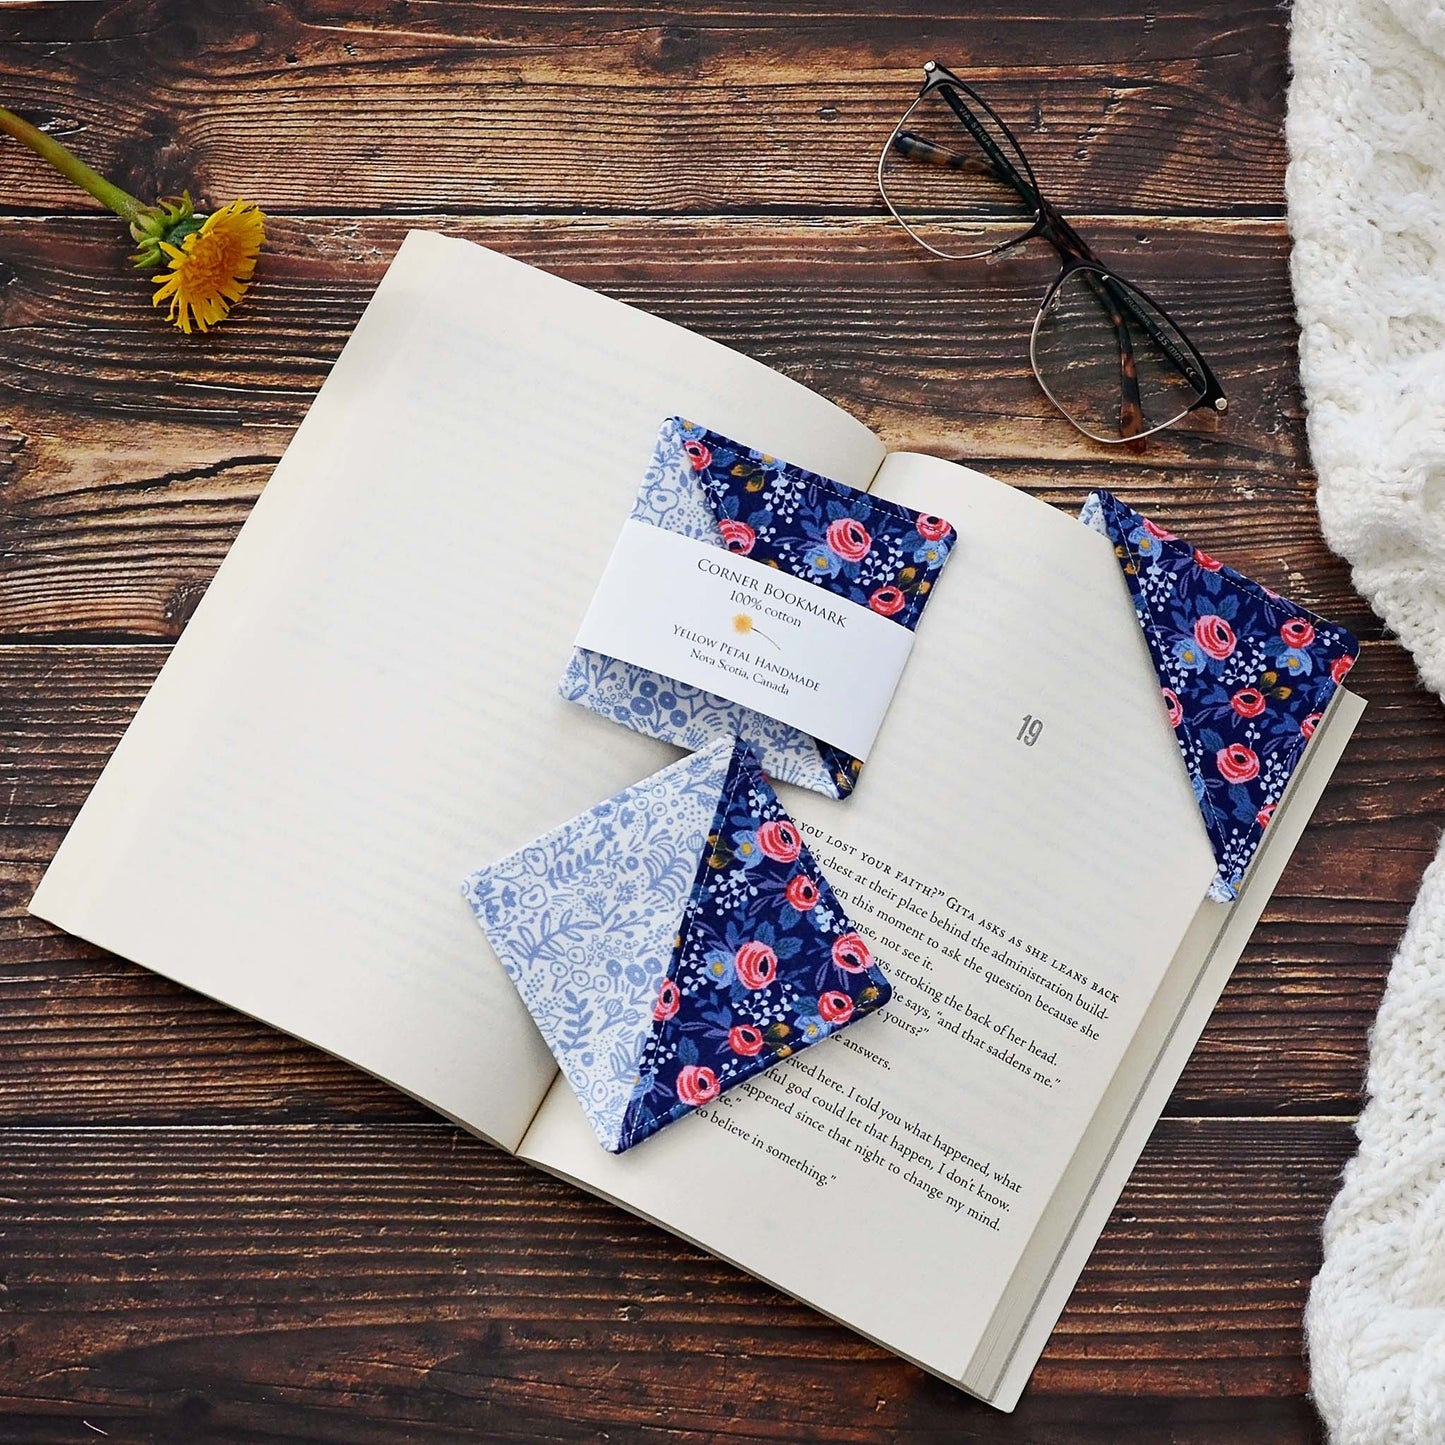 Pretty blue floral bookmarks made using Rifle Paper Co florals.  Made in Nova Scotia, Canada.